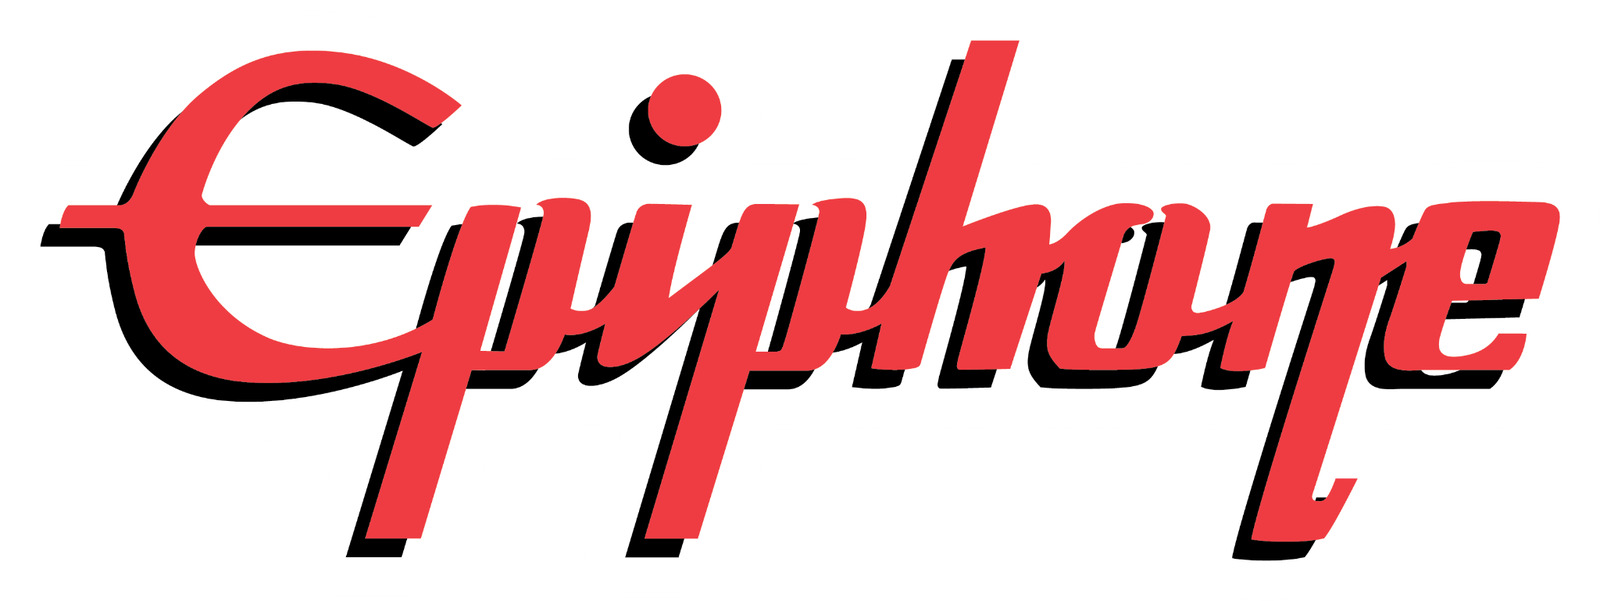 Epiphone guitar Logo Sticker / Vinyl Decal  | 10 Sizes with TRACKING